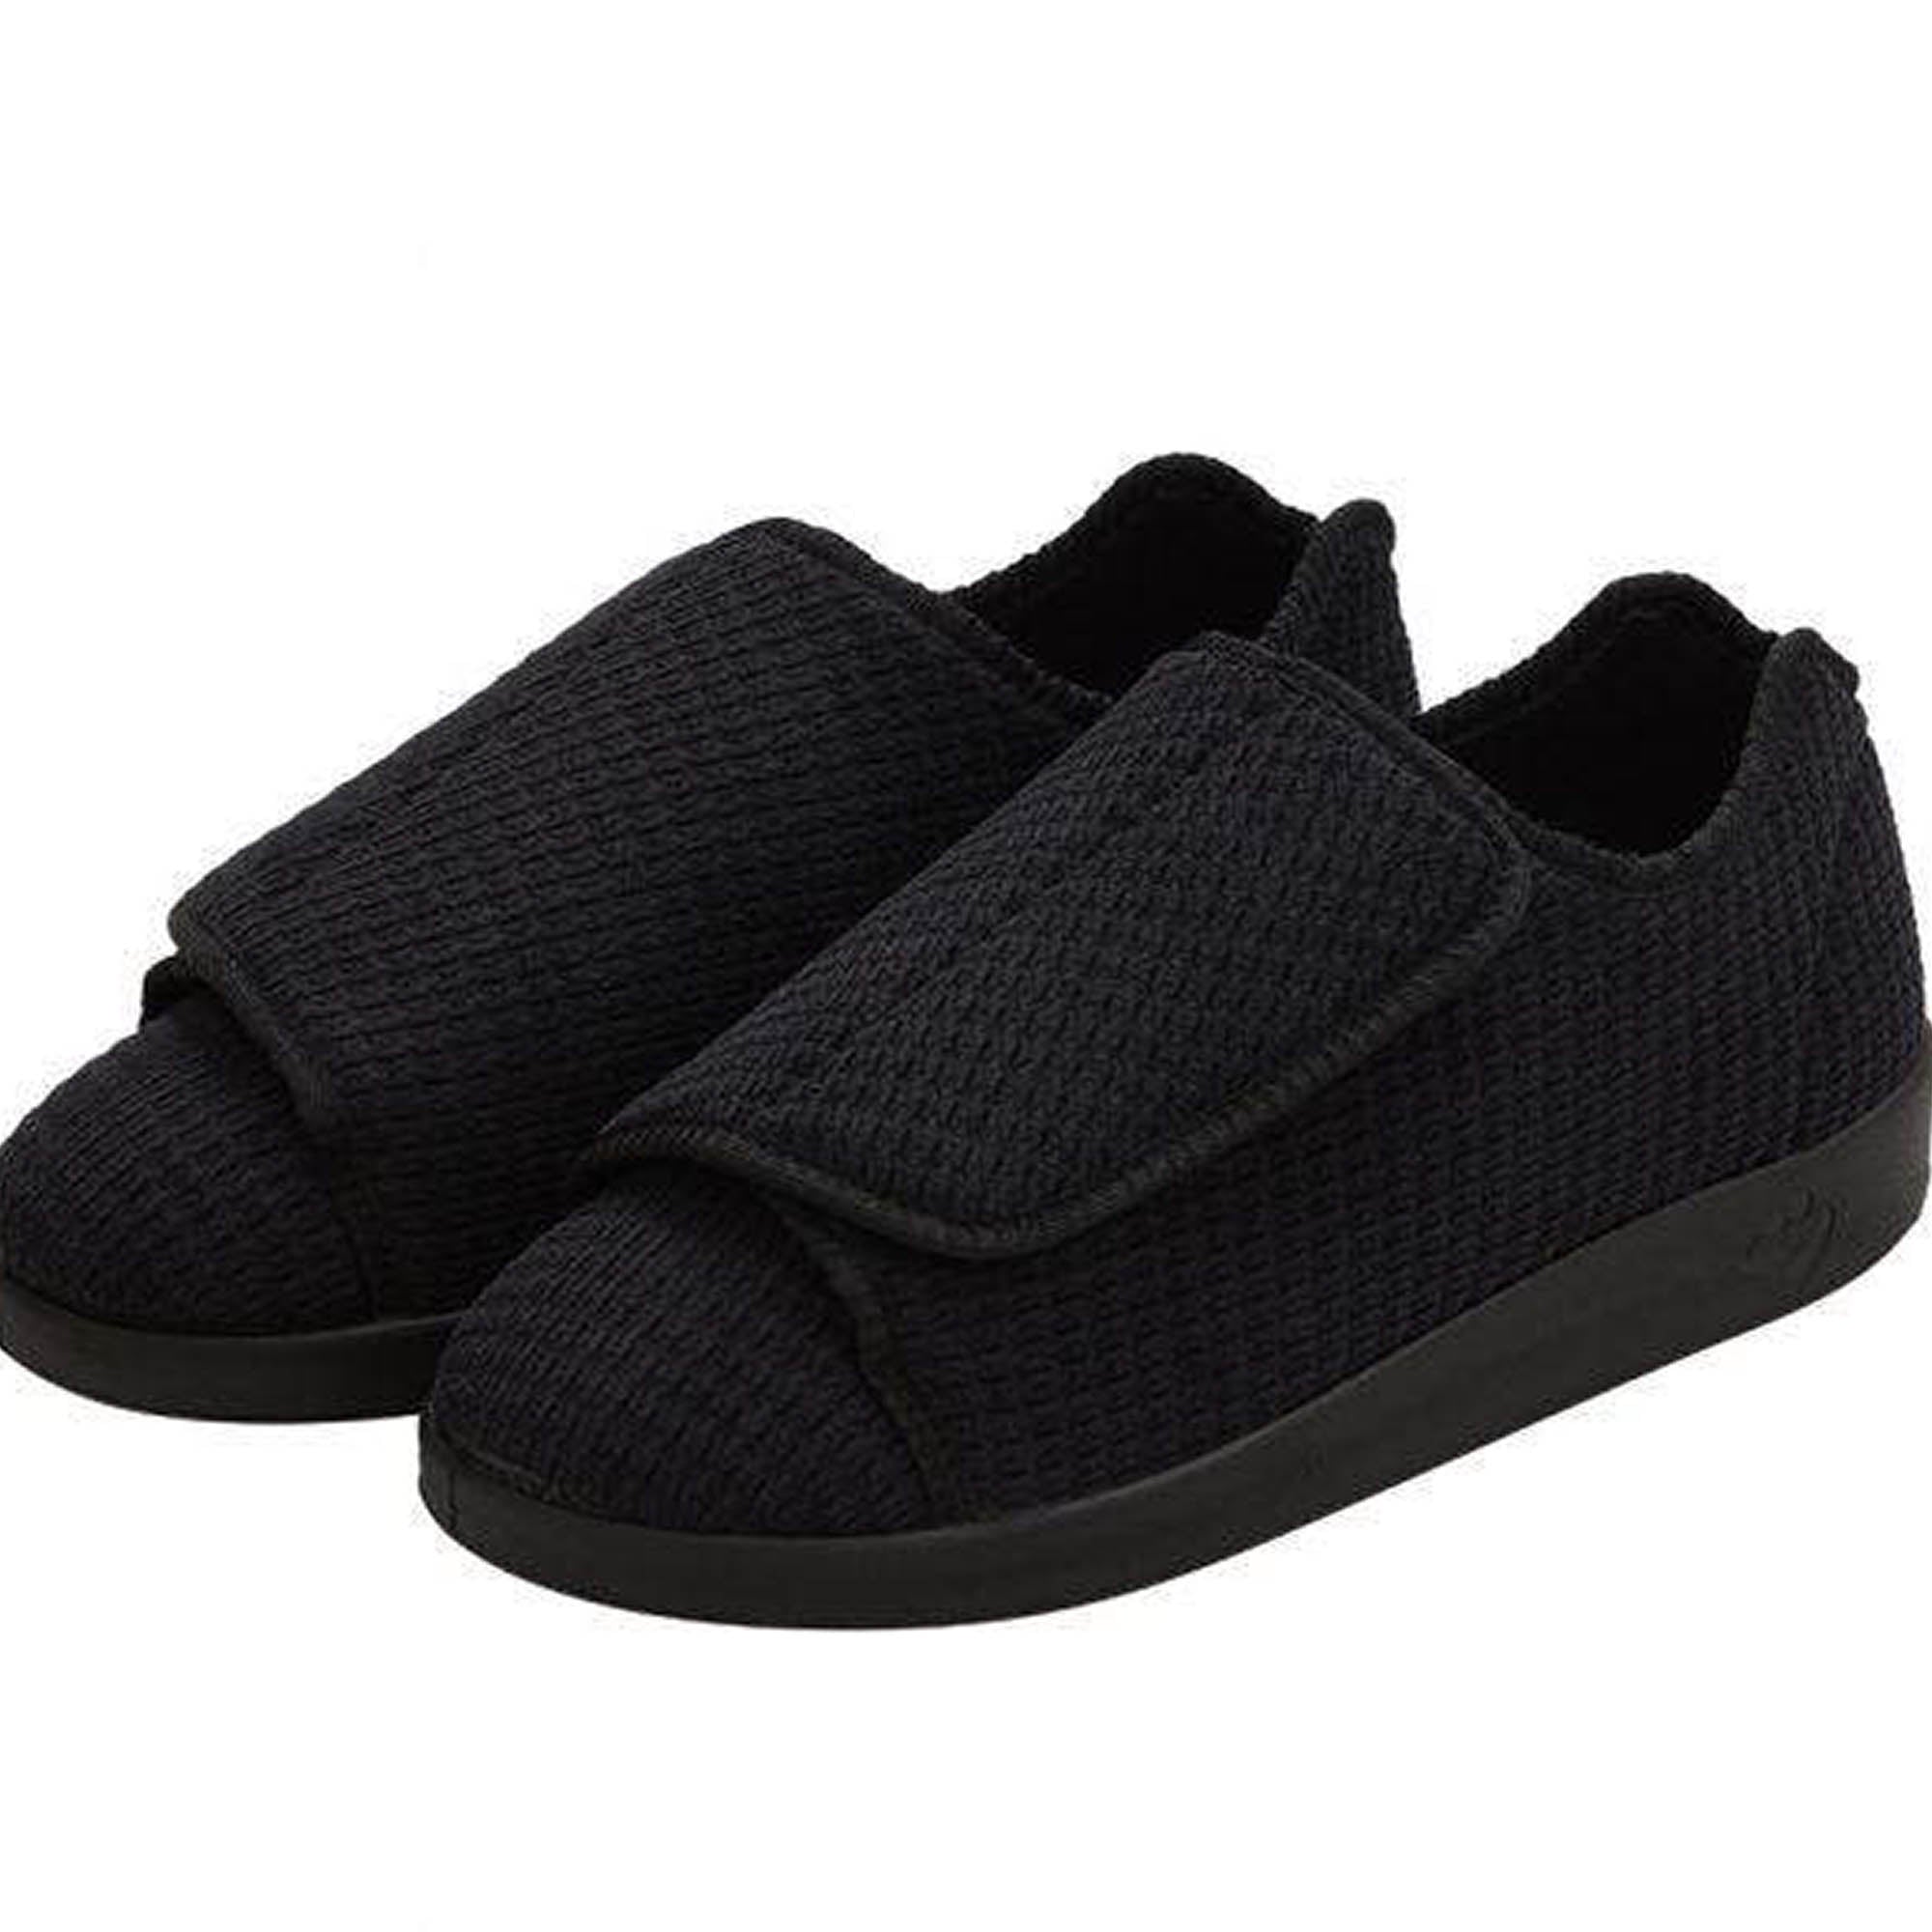 Silverts Men's Extra Extra Wide Slip-Resistant Slippers - Black - 11